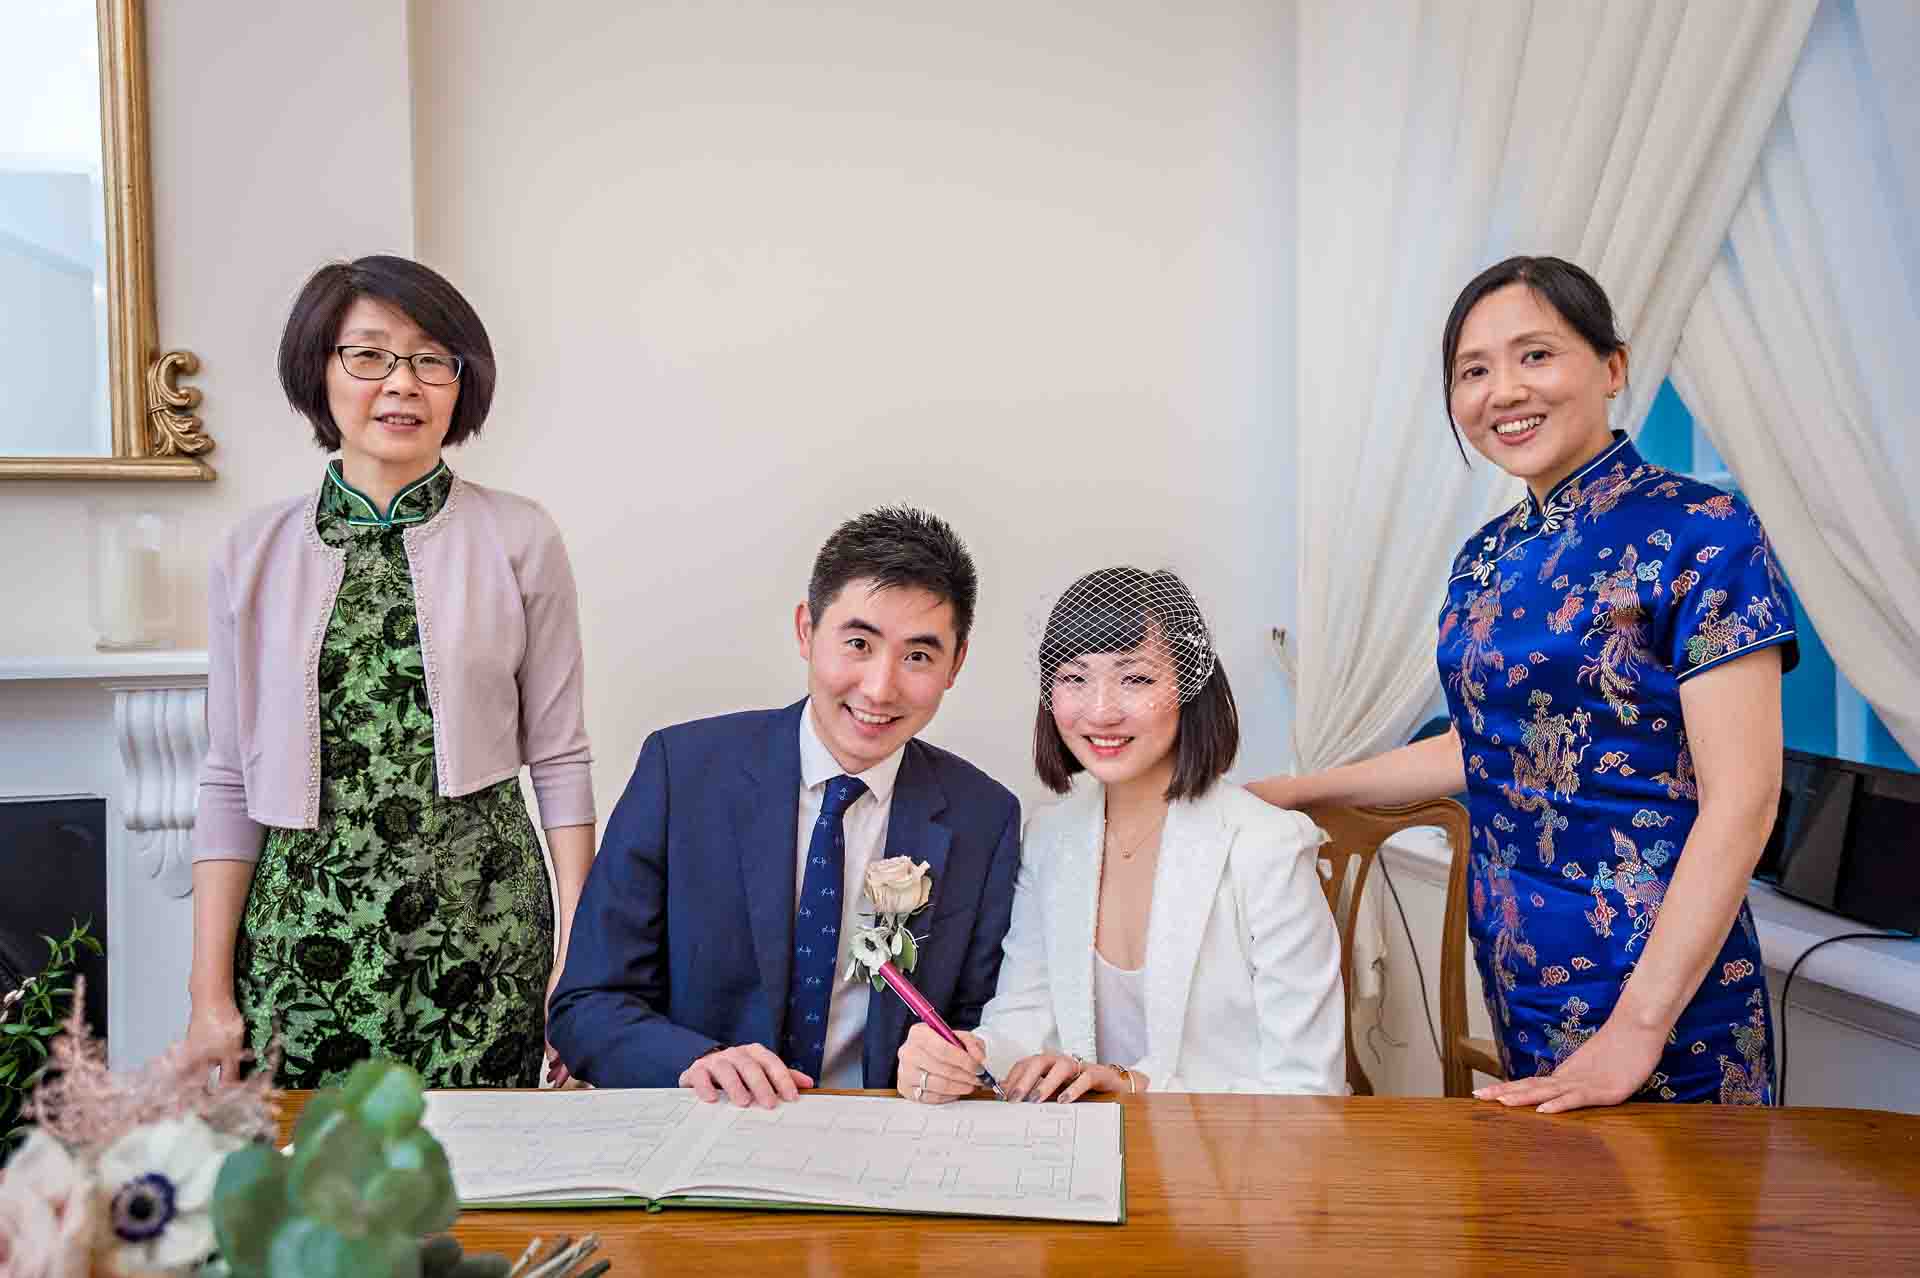 The couple pose with their wedding register and witnesses